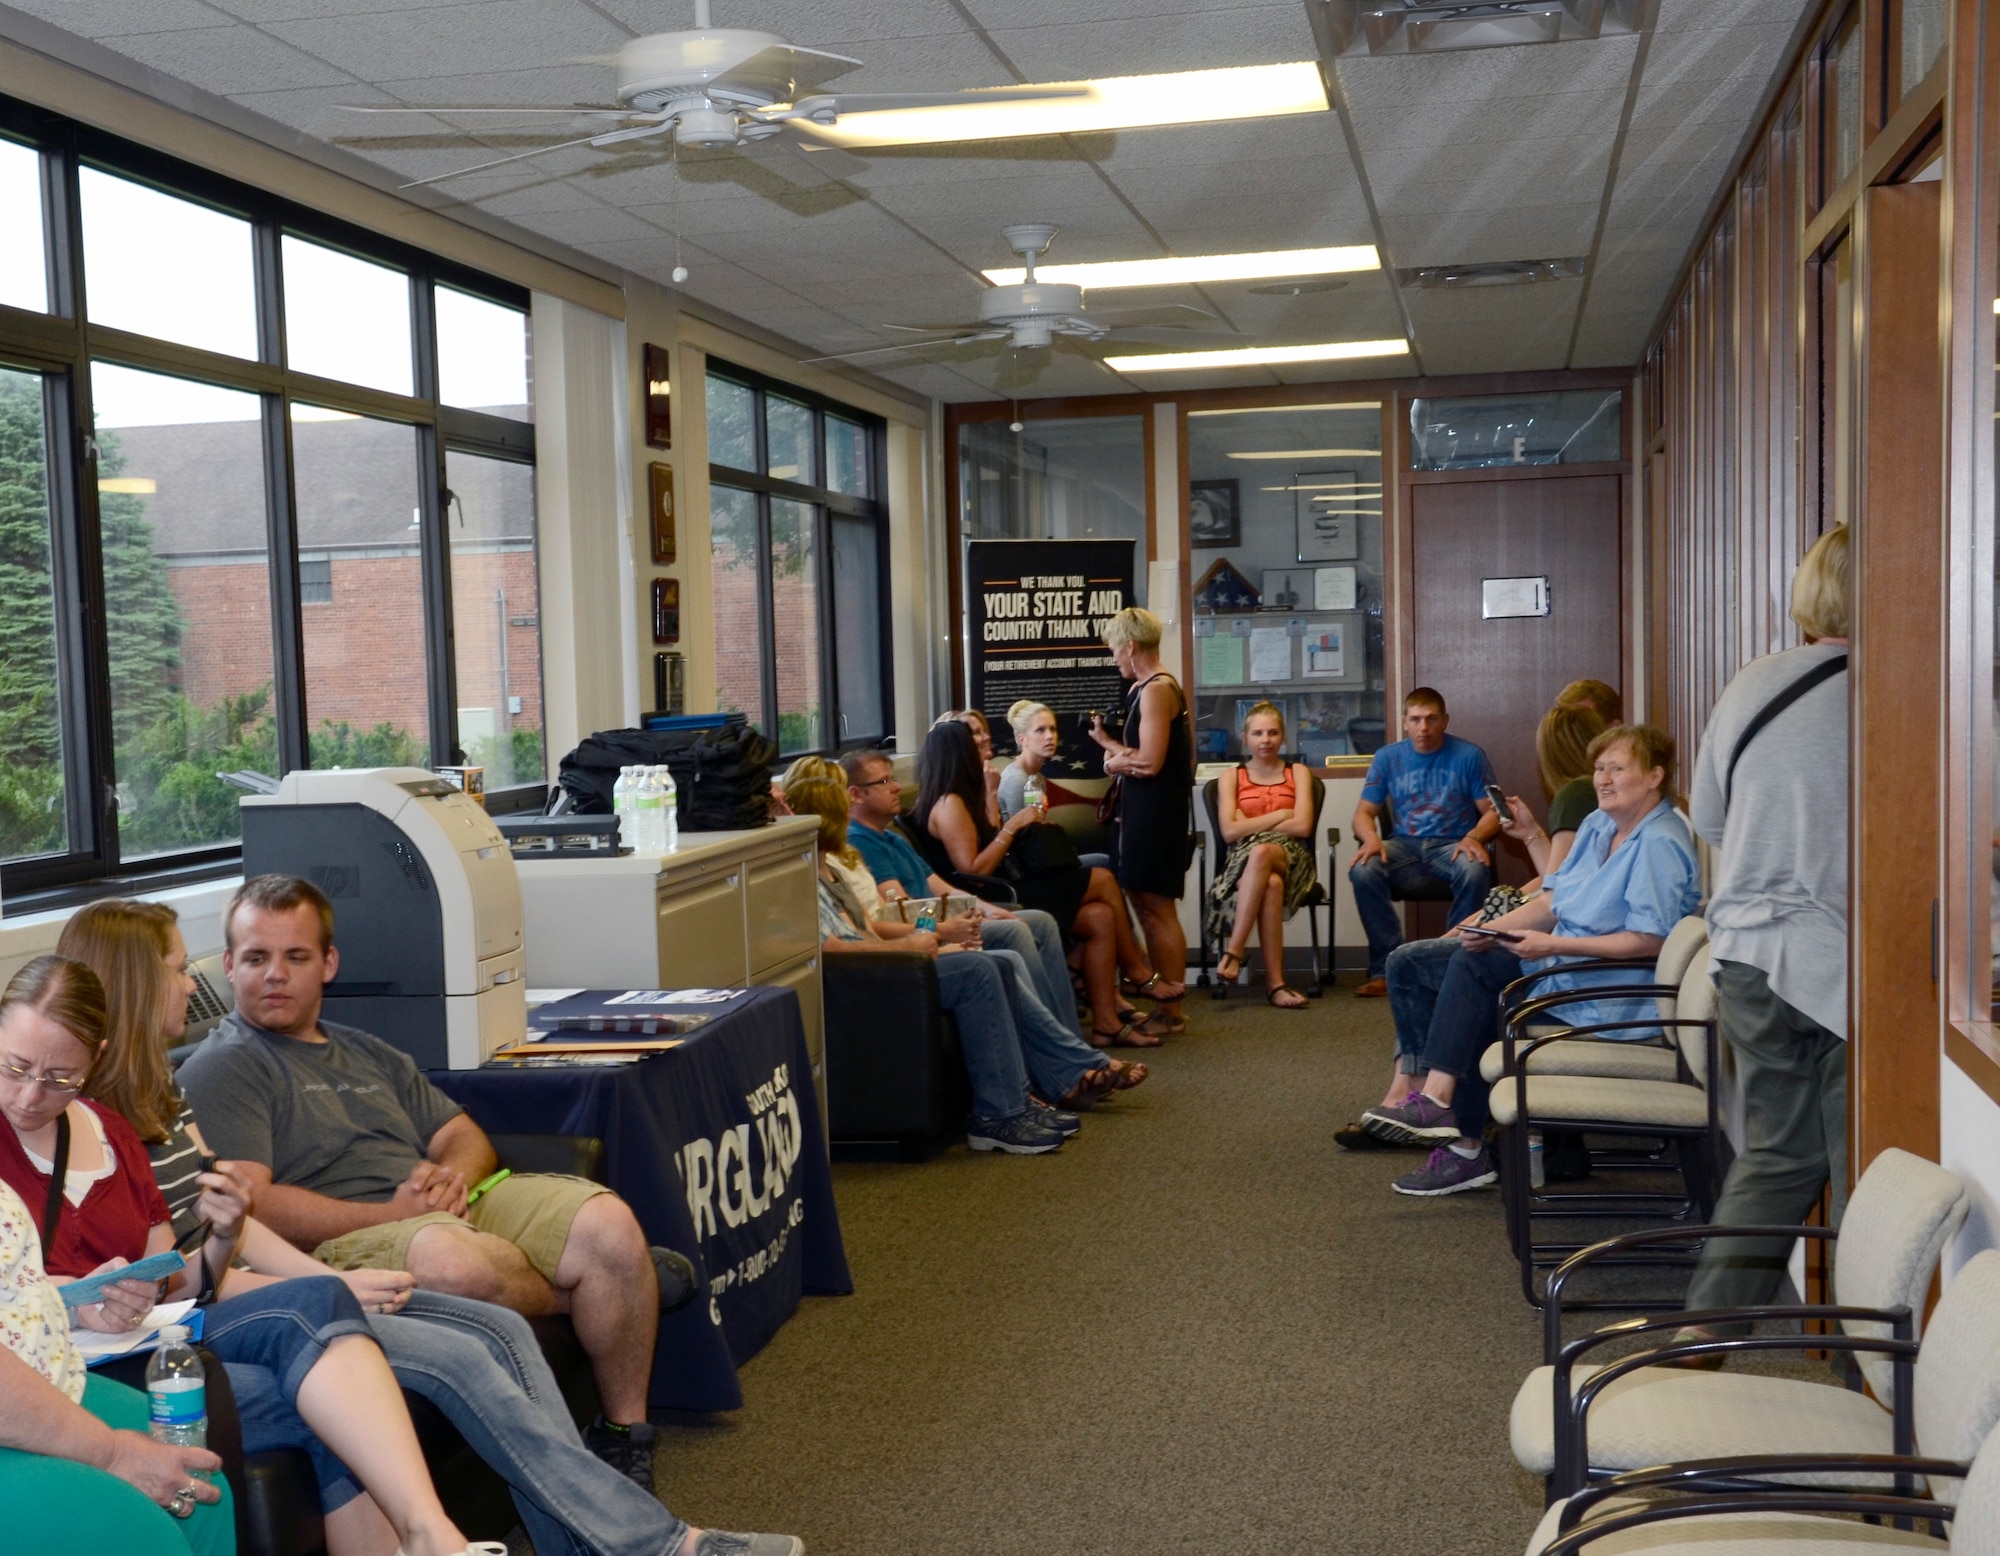 SIOUX FALLS, S.D. - New enlistees and their families wait patiently in the recruiting office for their turn to sign their enlistment contracts to join the South Dakota Air National Guard at Joe Foss Field, S.D. June 5, 2015.  114th Force Support Squadron personnel worked overtime to ensure these new members were enlisted before the deadline for them to recieve their enlistment bonus for joining the unit.(National Guard photo by Senior Master Sgt. Nancy Ausland/Released)